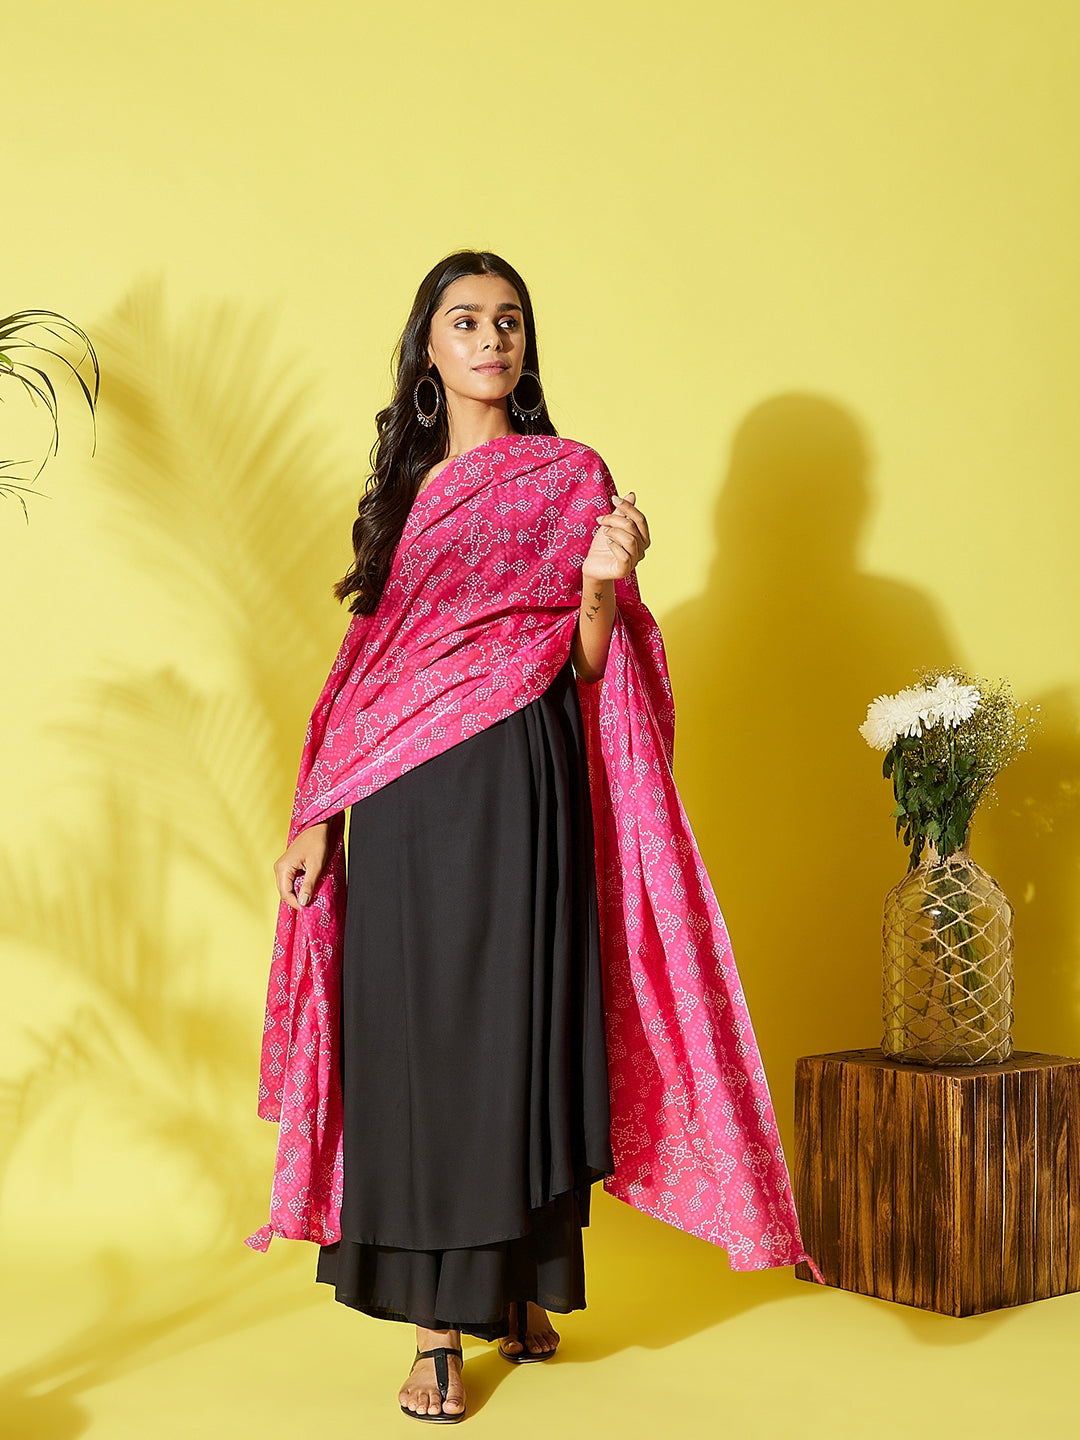 Black Suit with Jaal Handworked Dupatta - Rana's by Kshitija